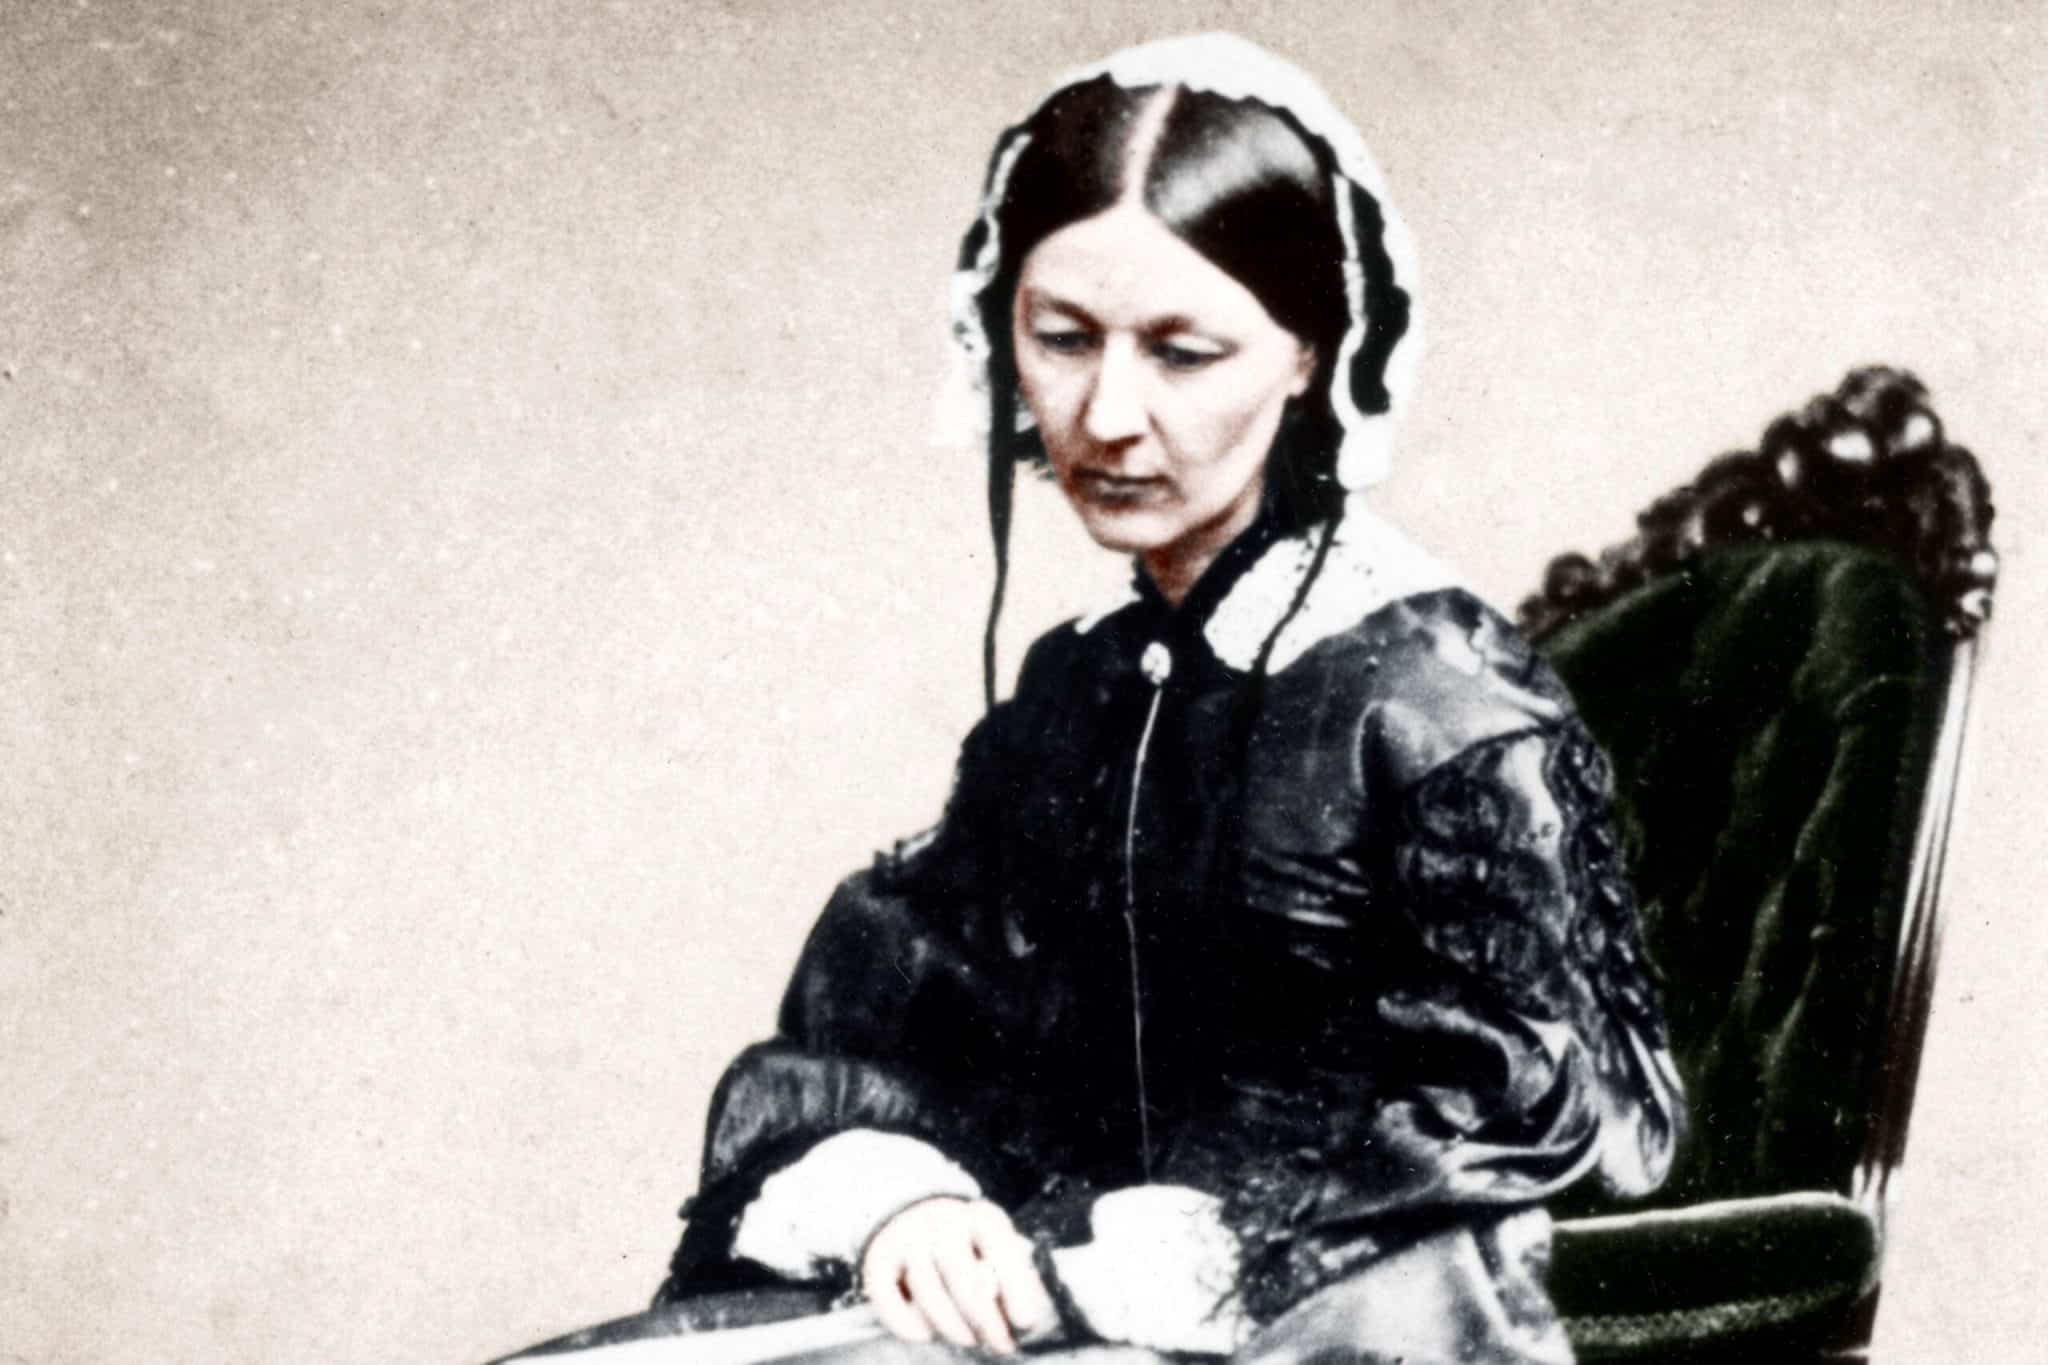 Florence Nightingale Birth Anniversary: The Lady With the Lamp